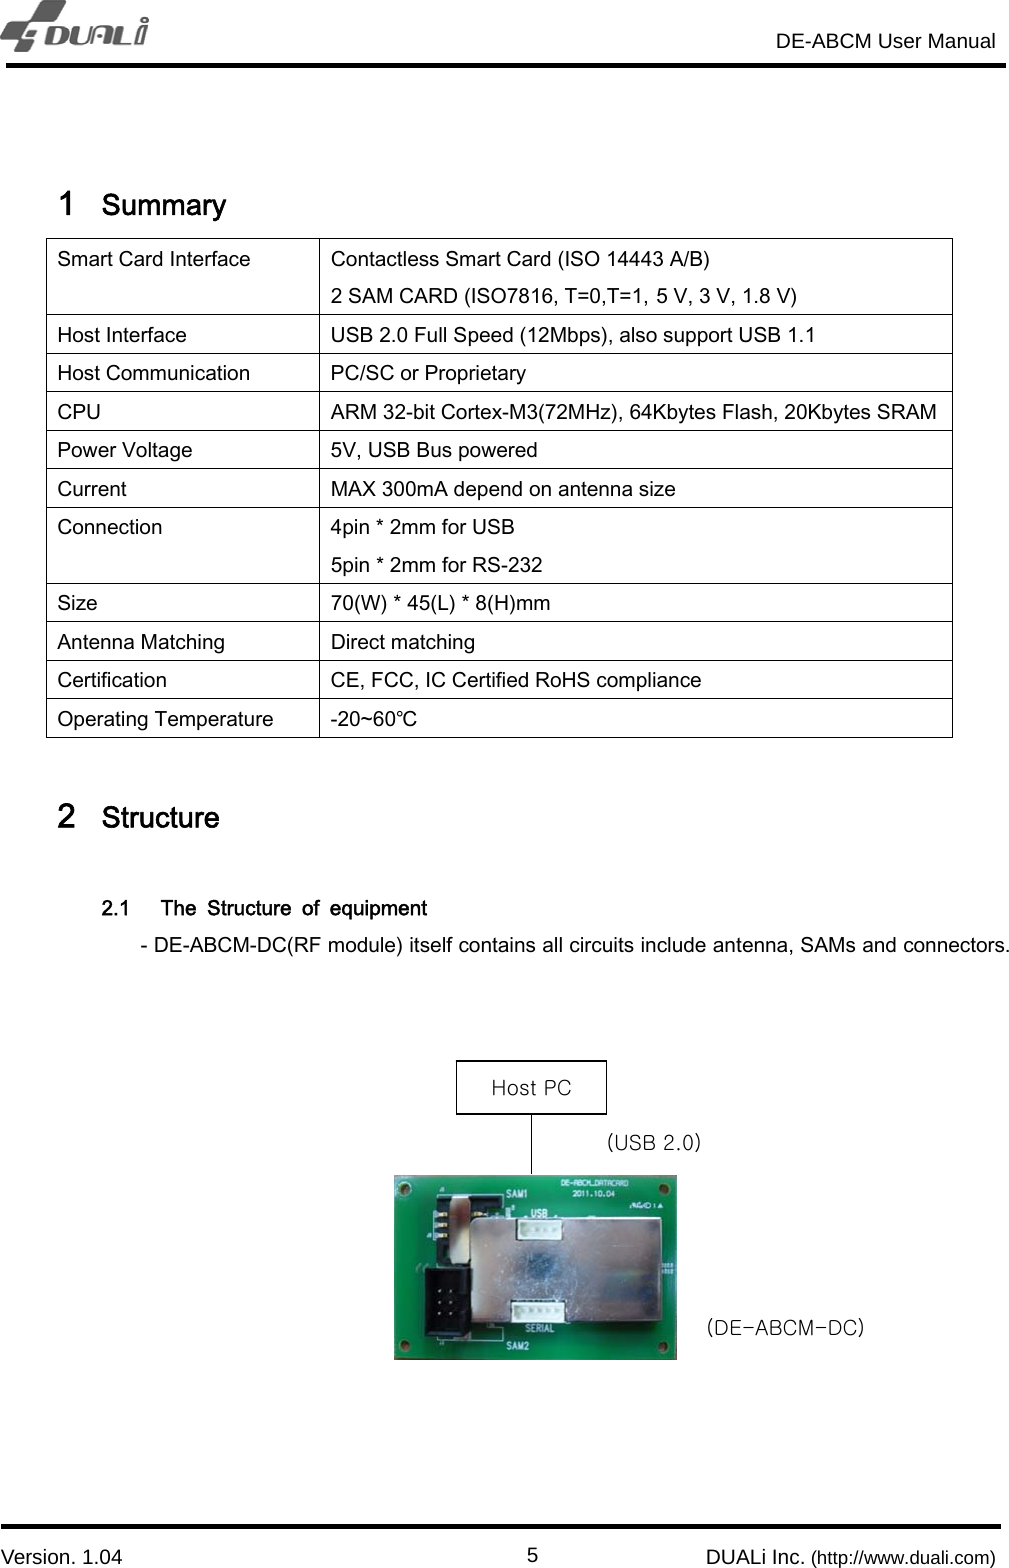                                                                       DE-ABCM User Manual                            Version. 1.04                                                        DUALi Inc. (http://www.duali.com)  5 1 Summary Smart Card Interface  Contactless Smart Card (ISO 14443 A/B) 2 SAM CARD (ISO7816, T=0,T=1, 5 V, 3 V, 1.8 V) Host Interface  USB 2.0 Full Speed (12Mbps), also support USB 1.1 Host Communication  PC/SC or Proprietary CPU  ARM 32-bit Cortex-M3(72MHz), 64Kbytes Flash, 20Kbytes SRAMPower Voltage  5V, USB Bus powered Current  MAX 300mA depend on antenna size Connection    4pin * 2mm for USB 5pin * 2mm for RS-232 Size  70(W) * 45(L) * 8(H)mm Antenna Matching  Direct matching Certification  CE, FCC, IC Certified RoHS compliance Operating Temperature  -20~60℃  2 Structure  2.1 The  Structure  of  equipment - DE-ABCM-DC(RF module) itself contains all circuits include antenna, SAMs and connectors.                 Host PC (DE-ABCM-DC)   (USB 2.0)